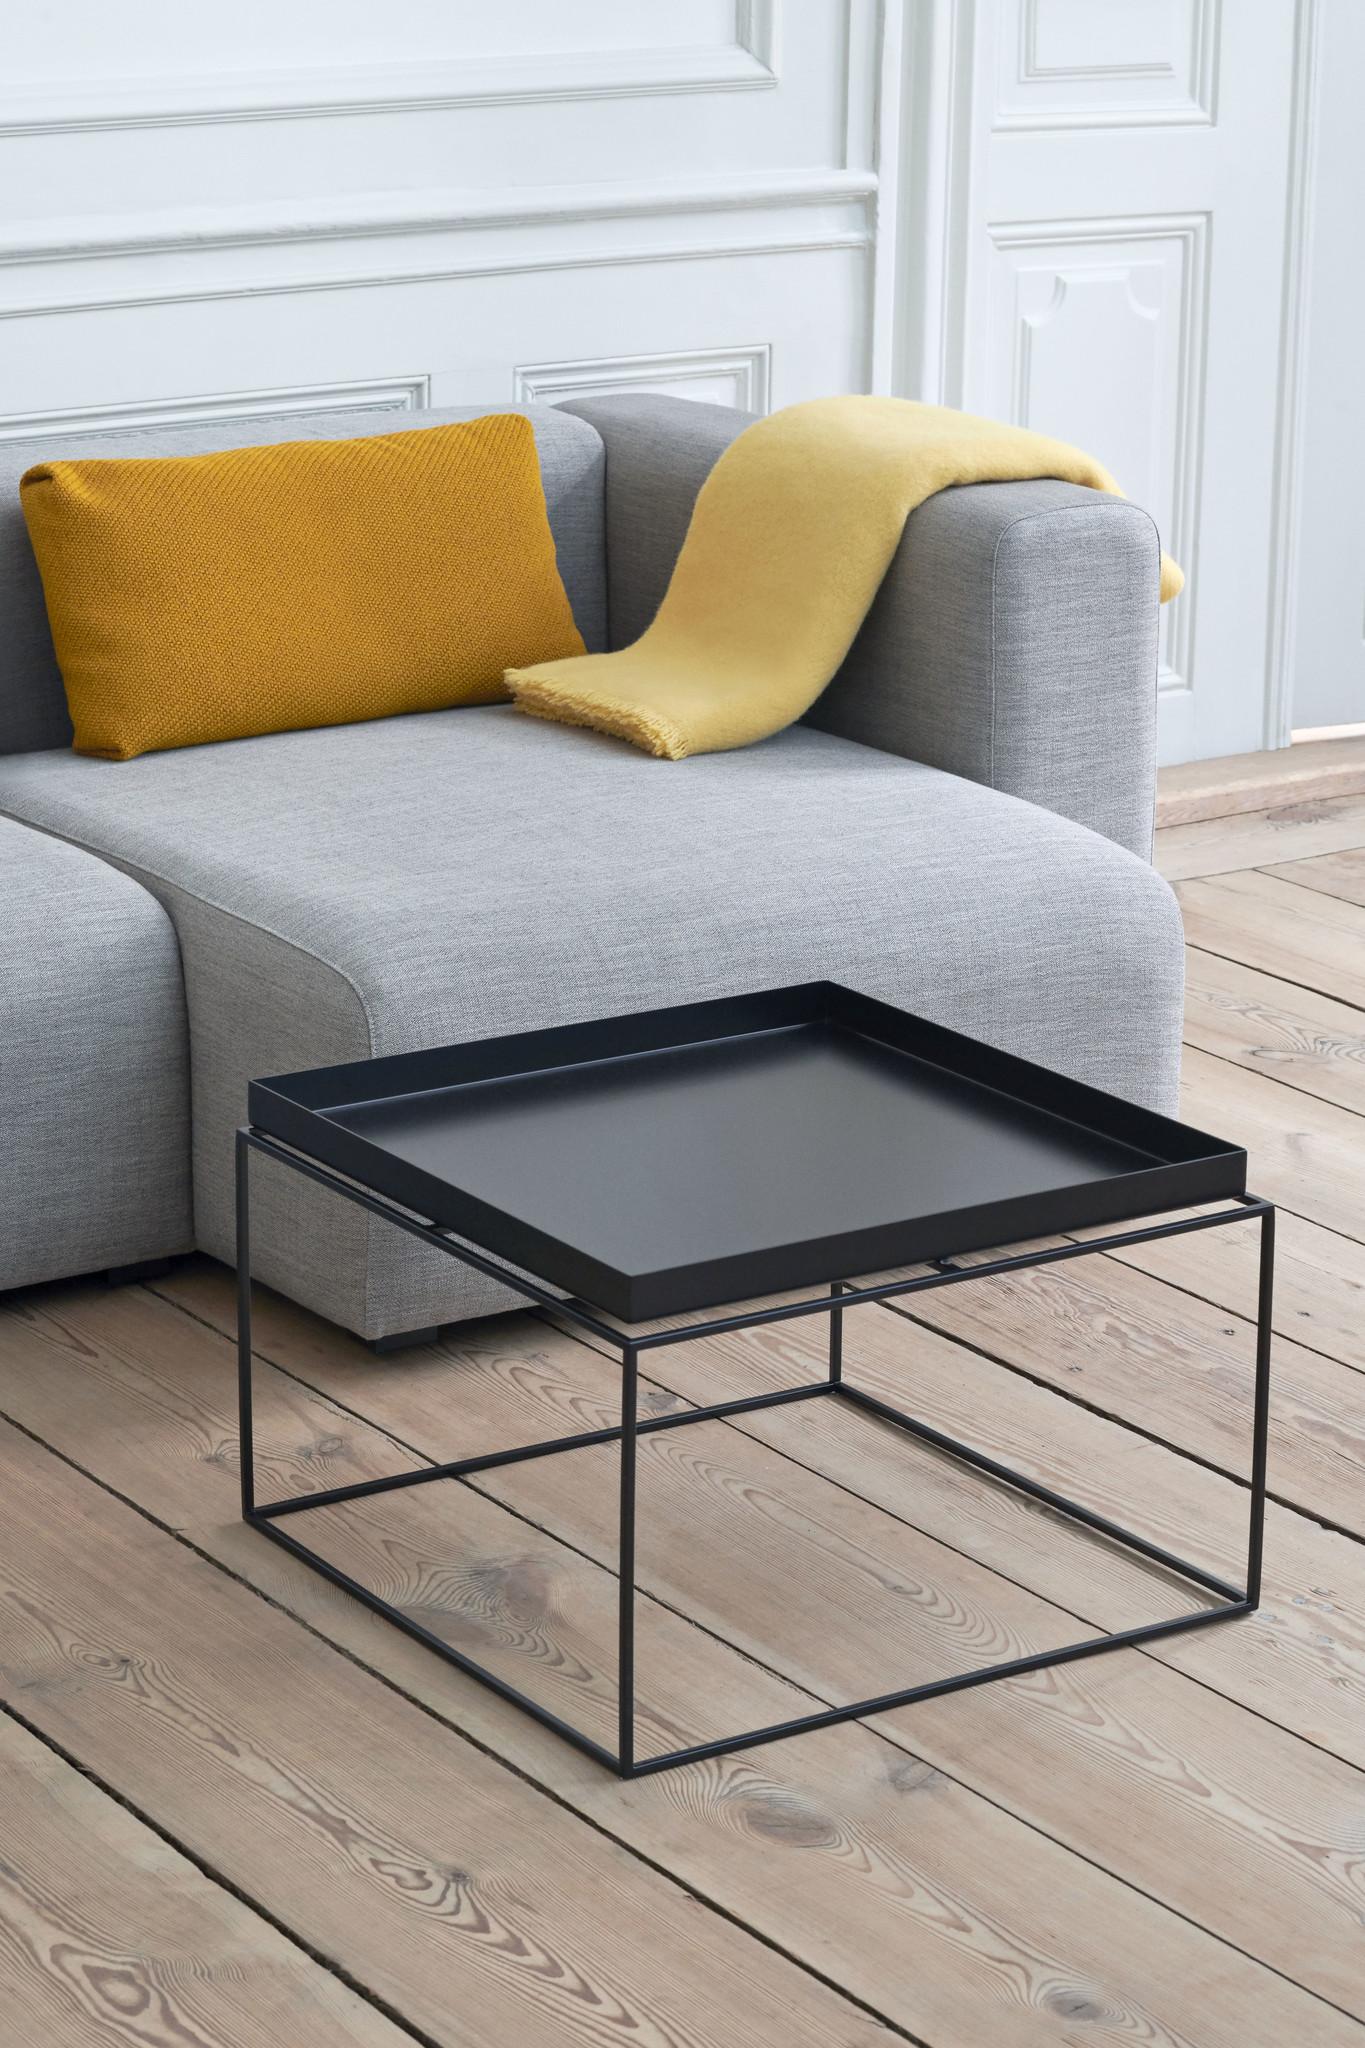 The metal tray table is a multi-functional piece of furniture that can easily be adapted to fit your needs.
When the tray top is in place, it can be used as a bedside table or coffee table, and when the tray top is removed, it becomes a regular